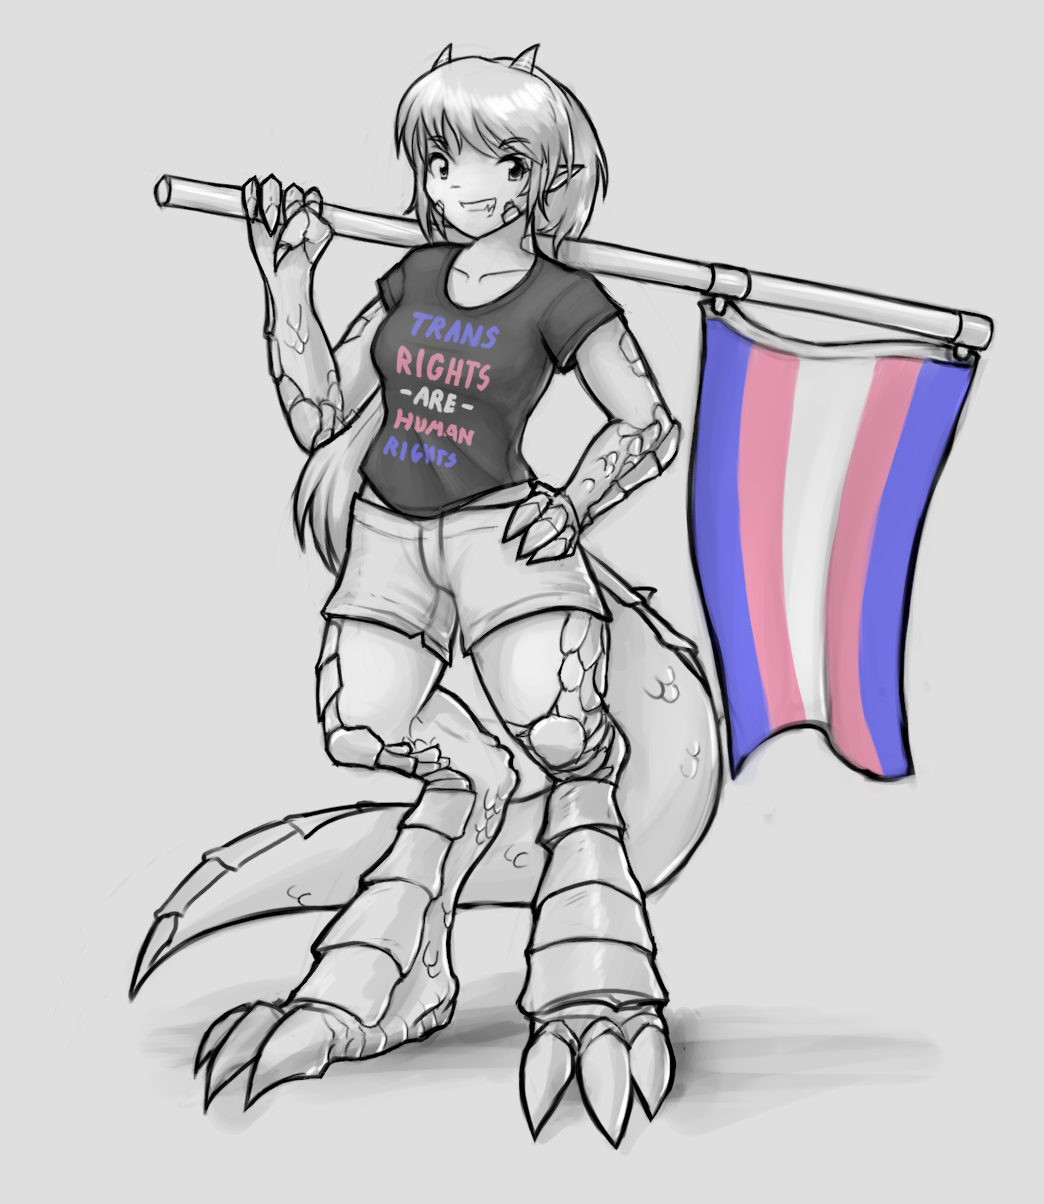 Kei in a Trans Rights are Human Rights shirt